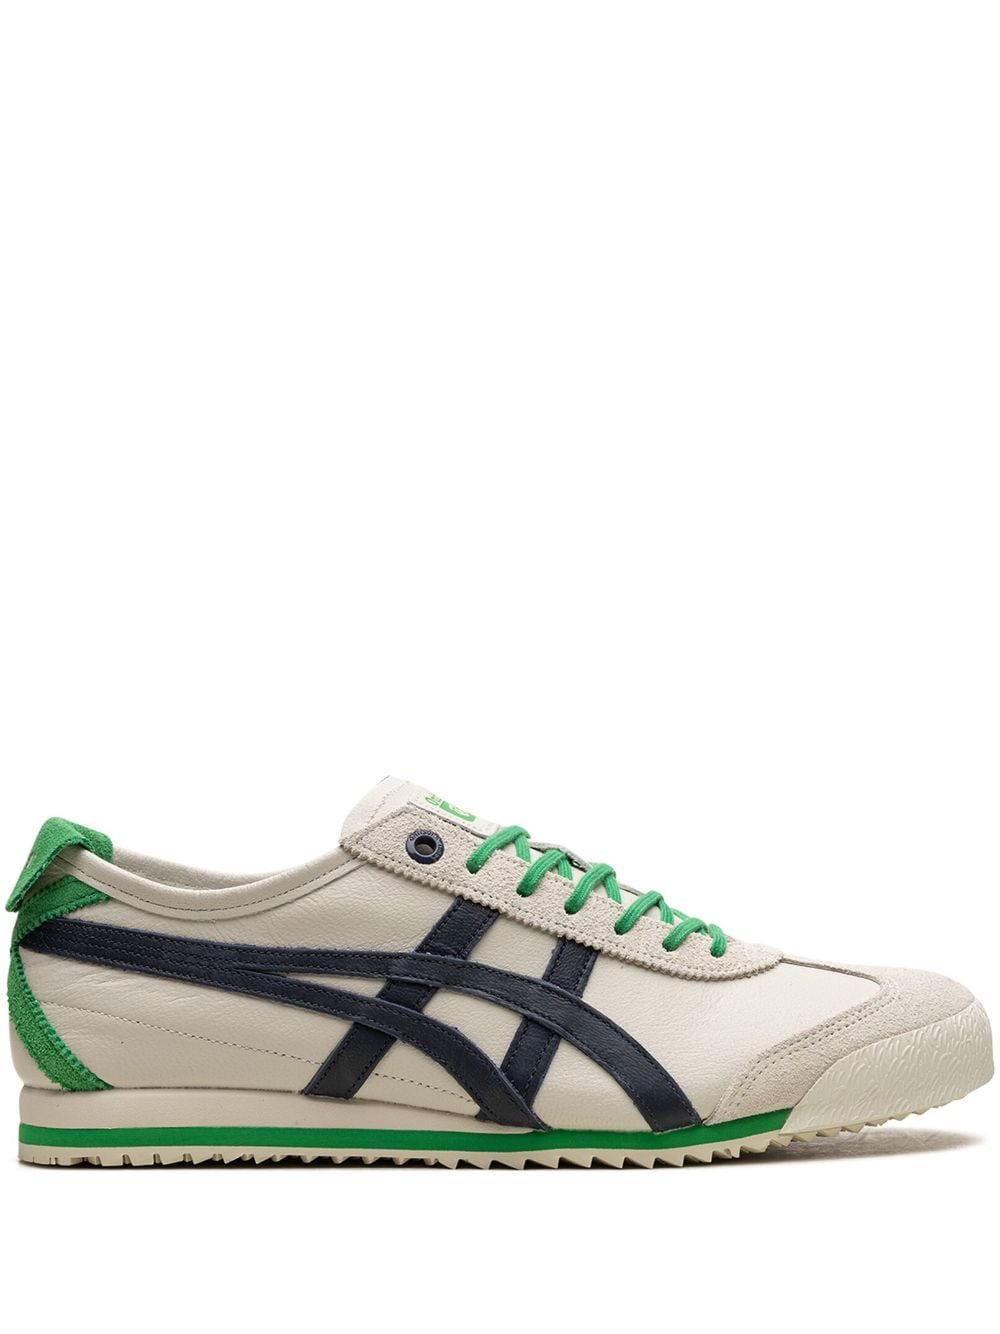 Onitsuka Tiger Mexico 66 SD "Birch/Peacoat Green" sneakers - Neutrals von Onitsuka Tiger